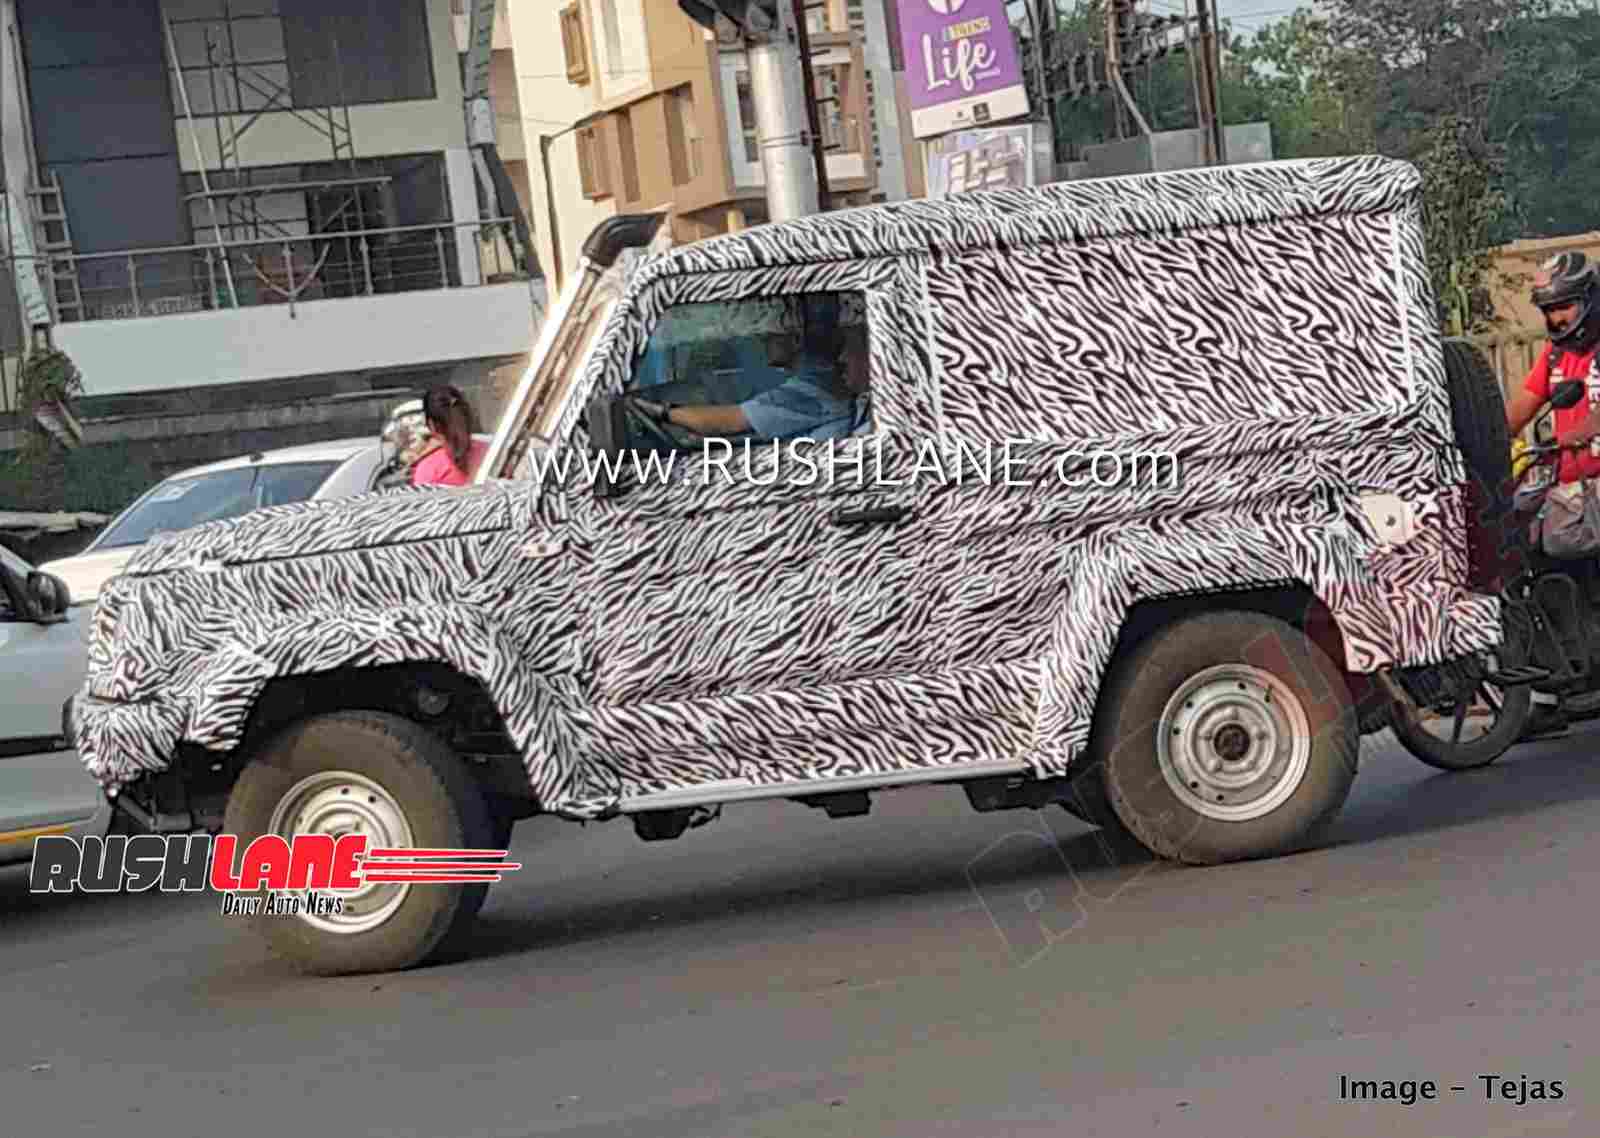 2020 Force Trax Bs6 And Gurkha Suv Spied Gets Led Drls